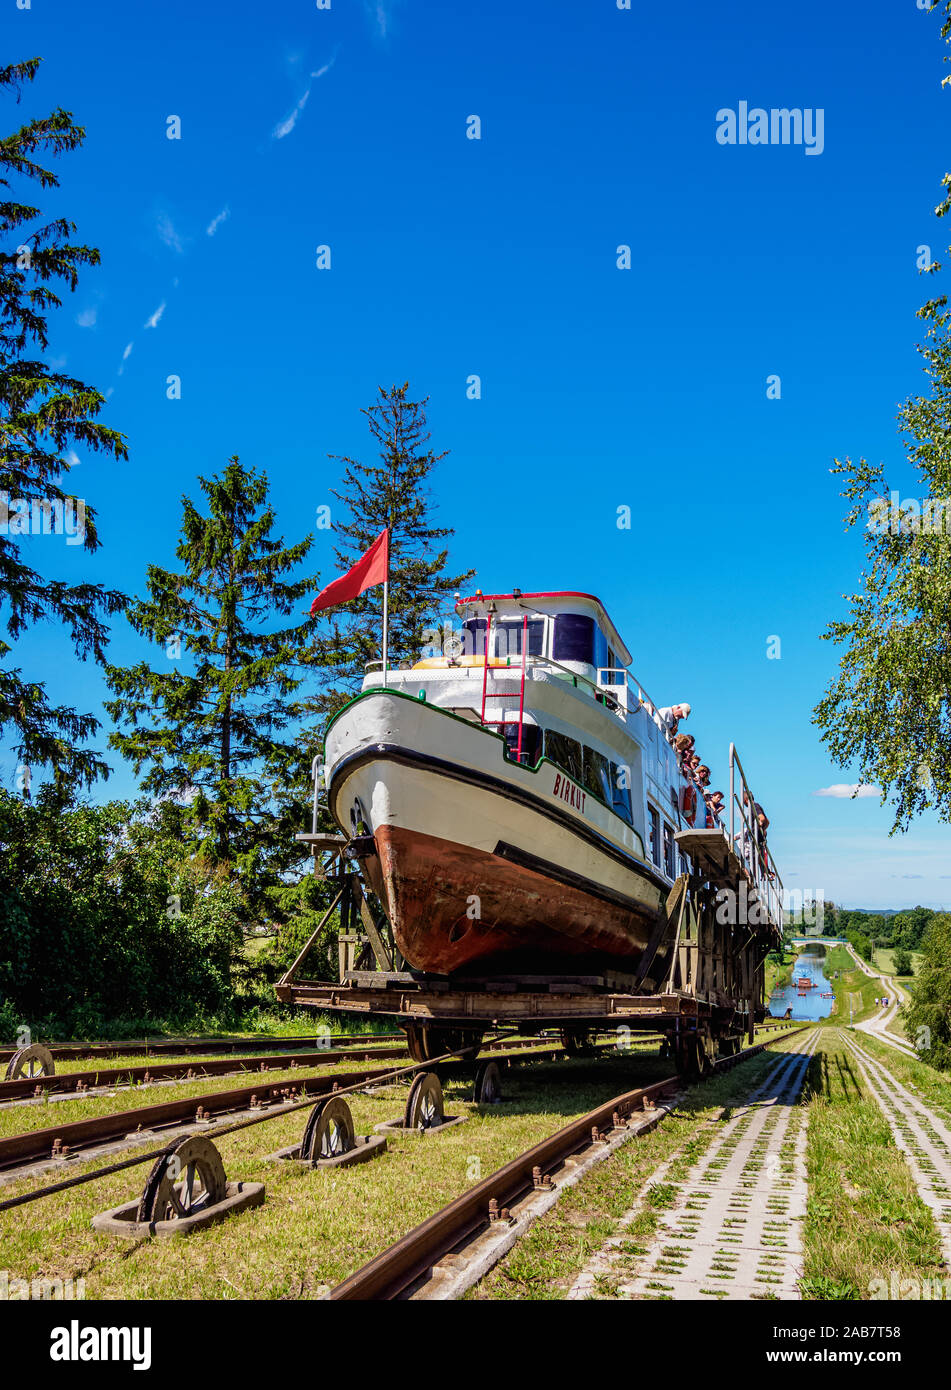 Tourist Boat in Cradle at Inclined Plane in Jelenie, Elblag Canal, Warmian-Masurian Voivodeship, Poland, Europe Stock Photo